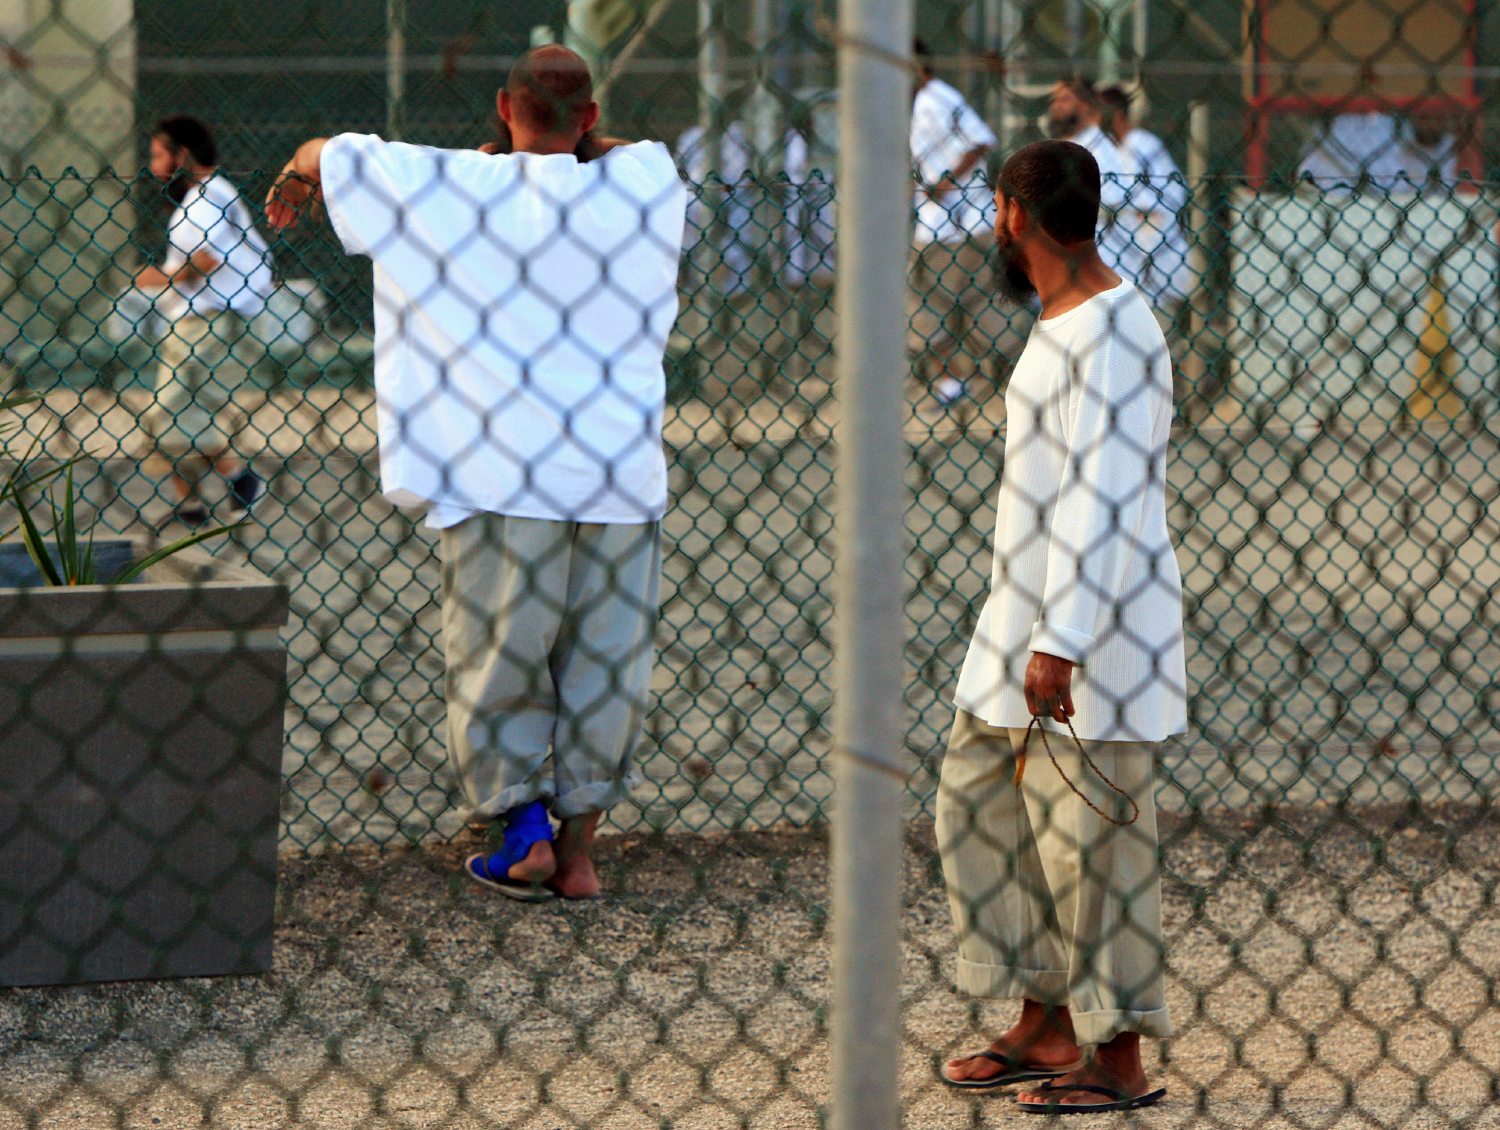 Detainees held by the US at Guantanamo Bay, Cuba, take exercise in May 2009 (Peter Nicholls/The Times)